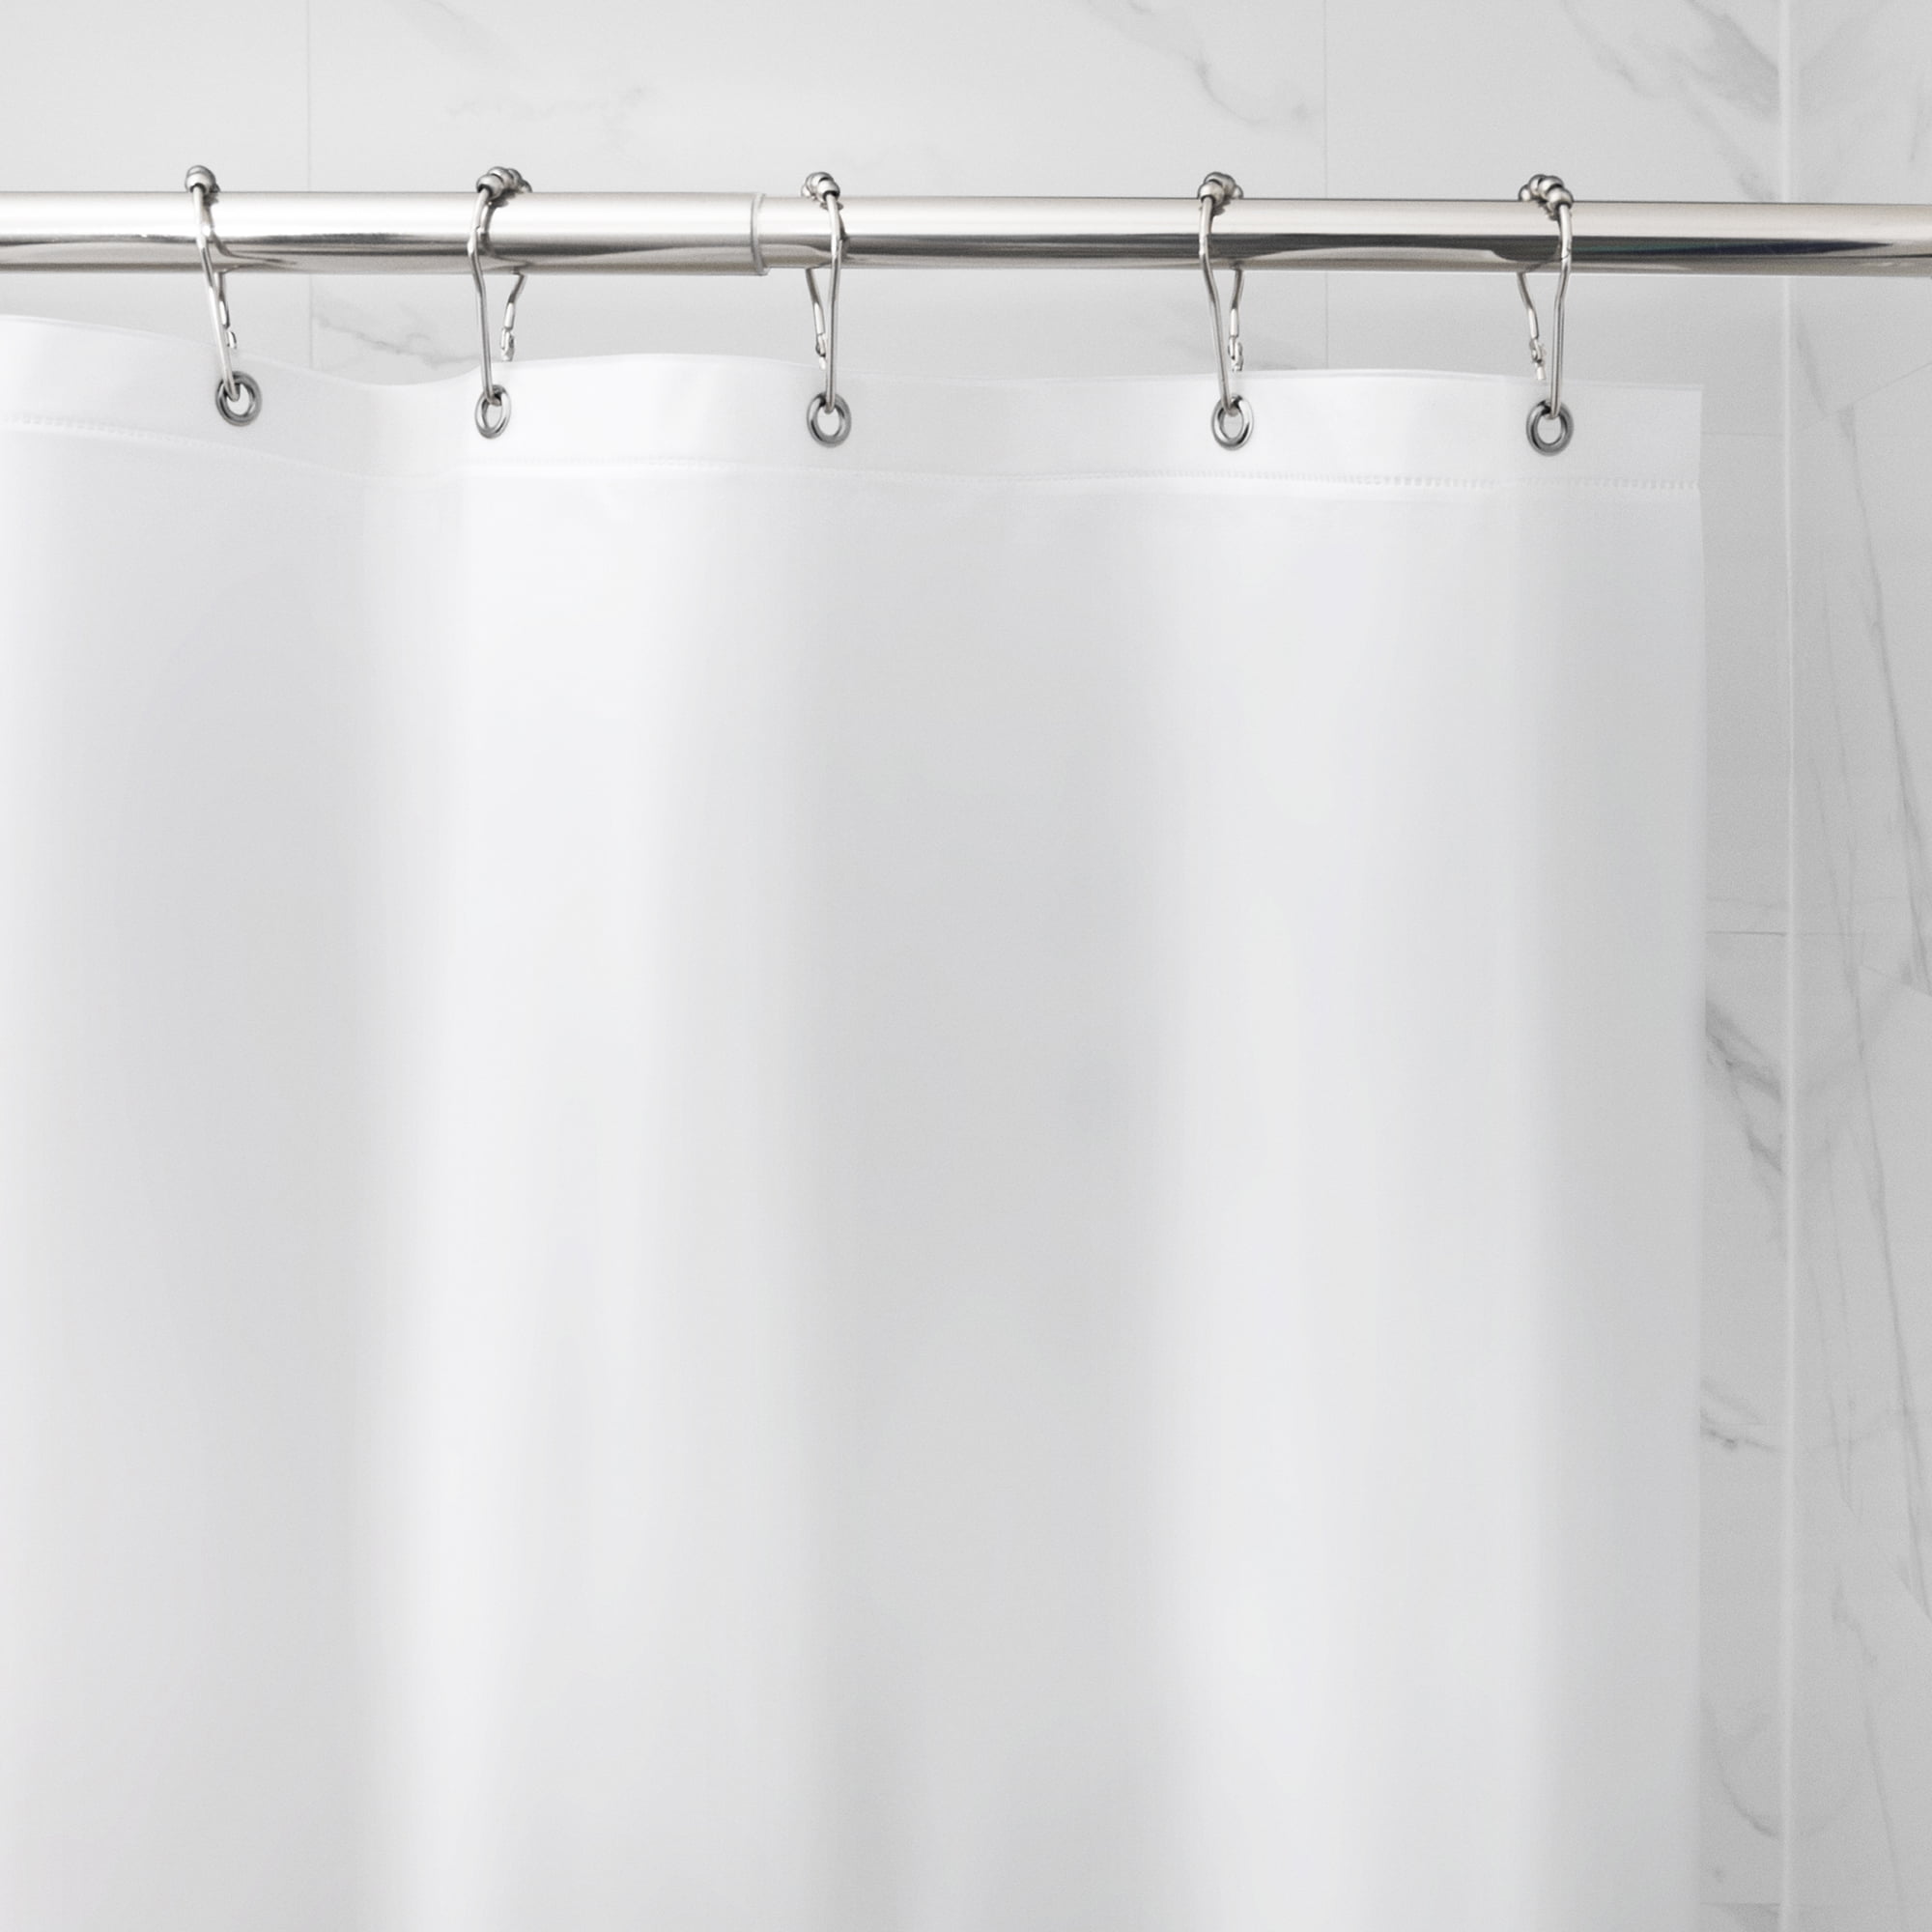 Frosted Peva Shower Liner 72 X, Bed Bath And Beyond Shower Curtain Liner